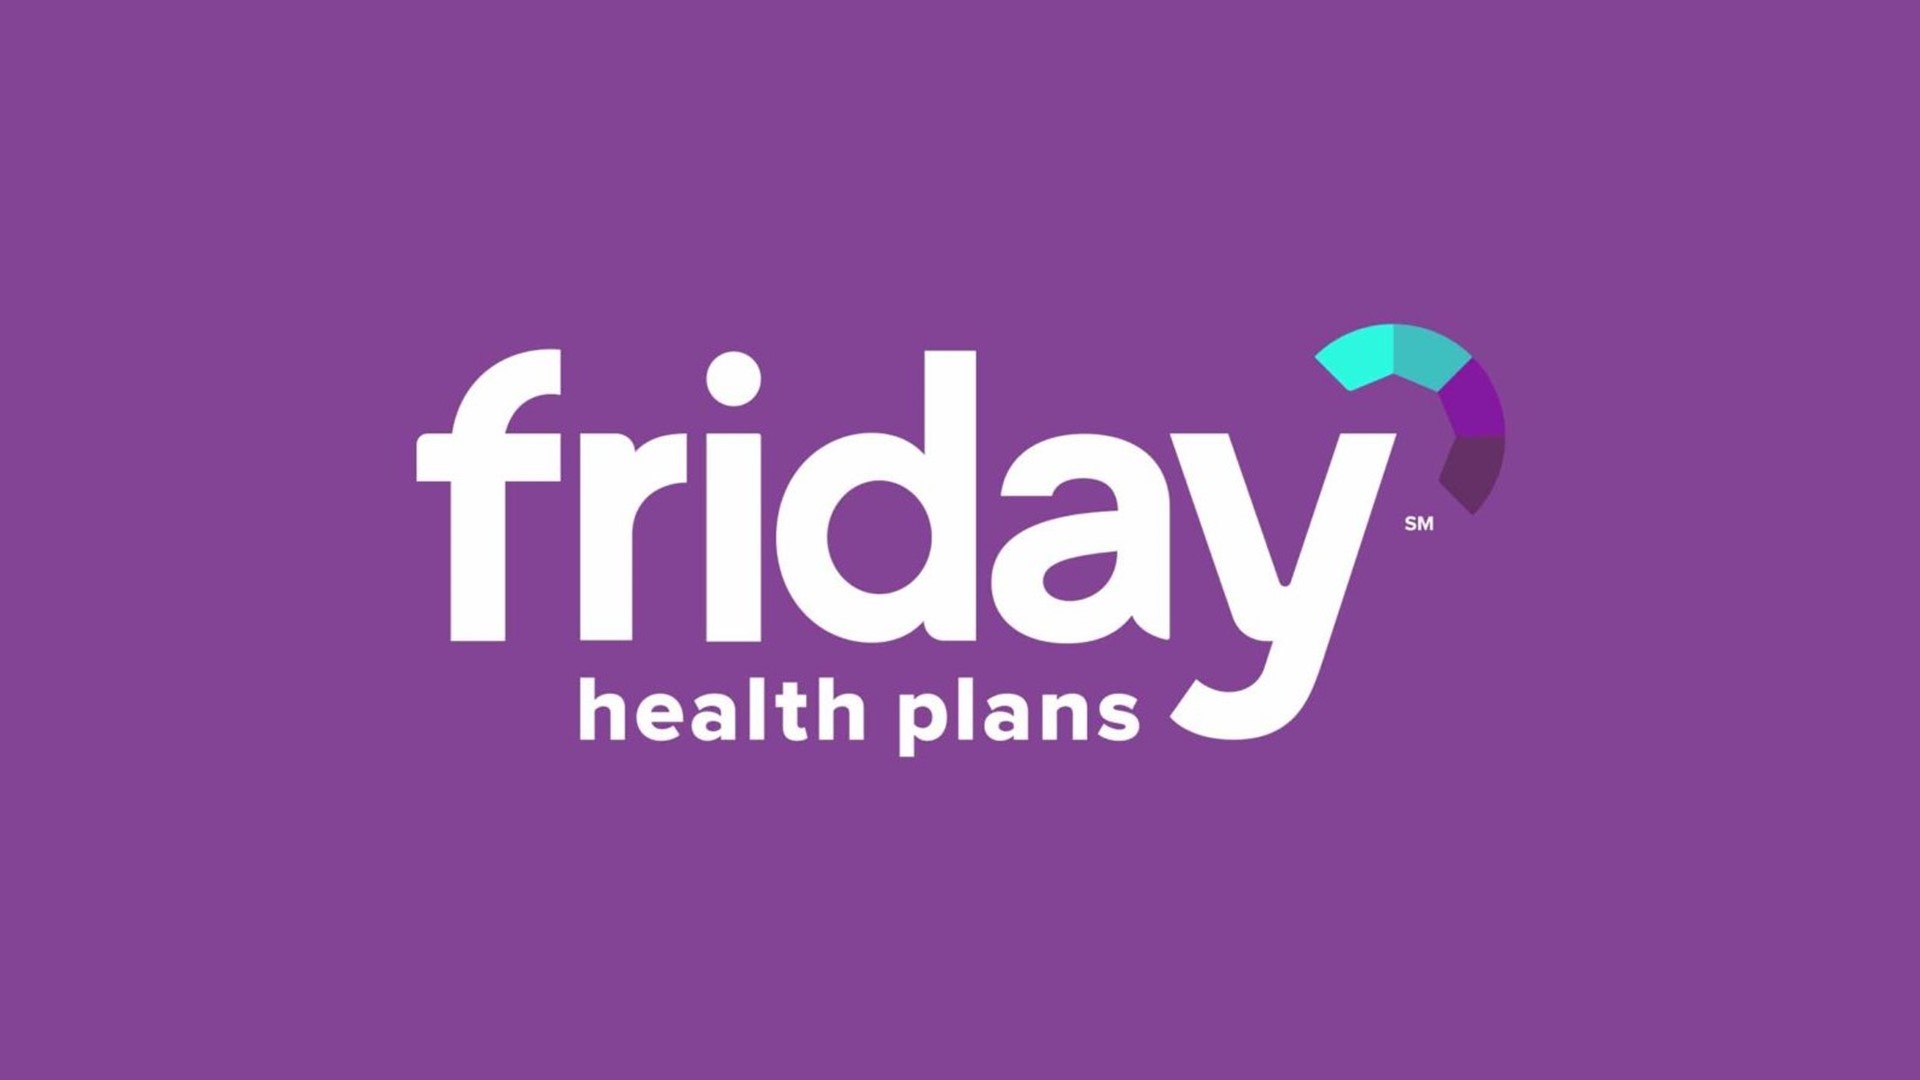 Health insurance made simple! Check out four  simple plan levels from Friday Health Plans.